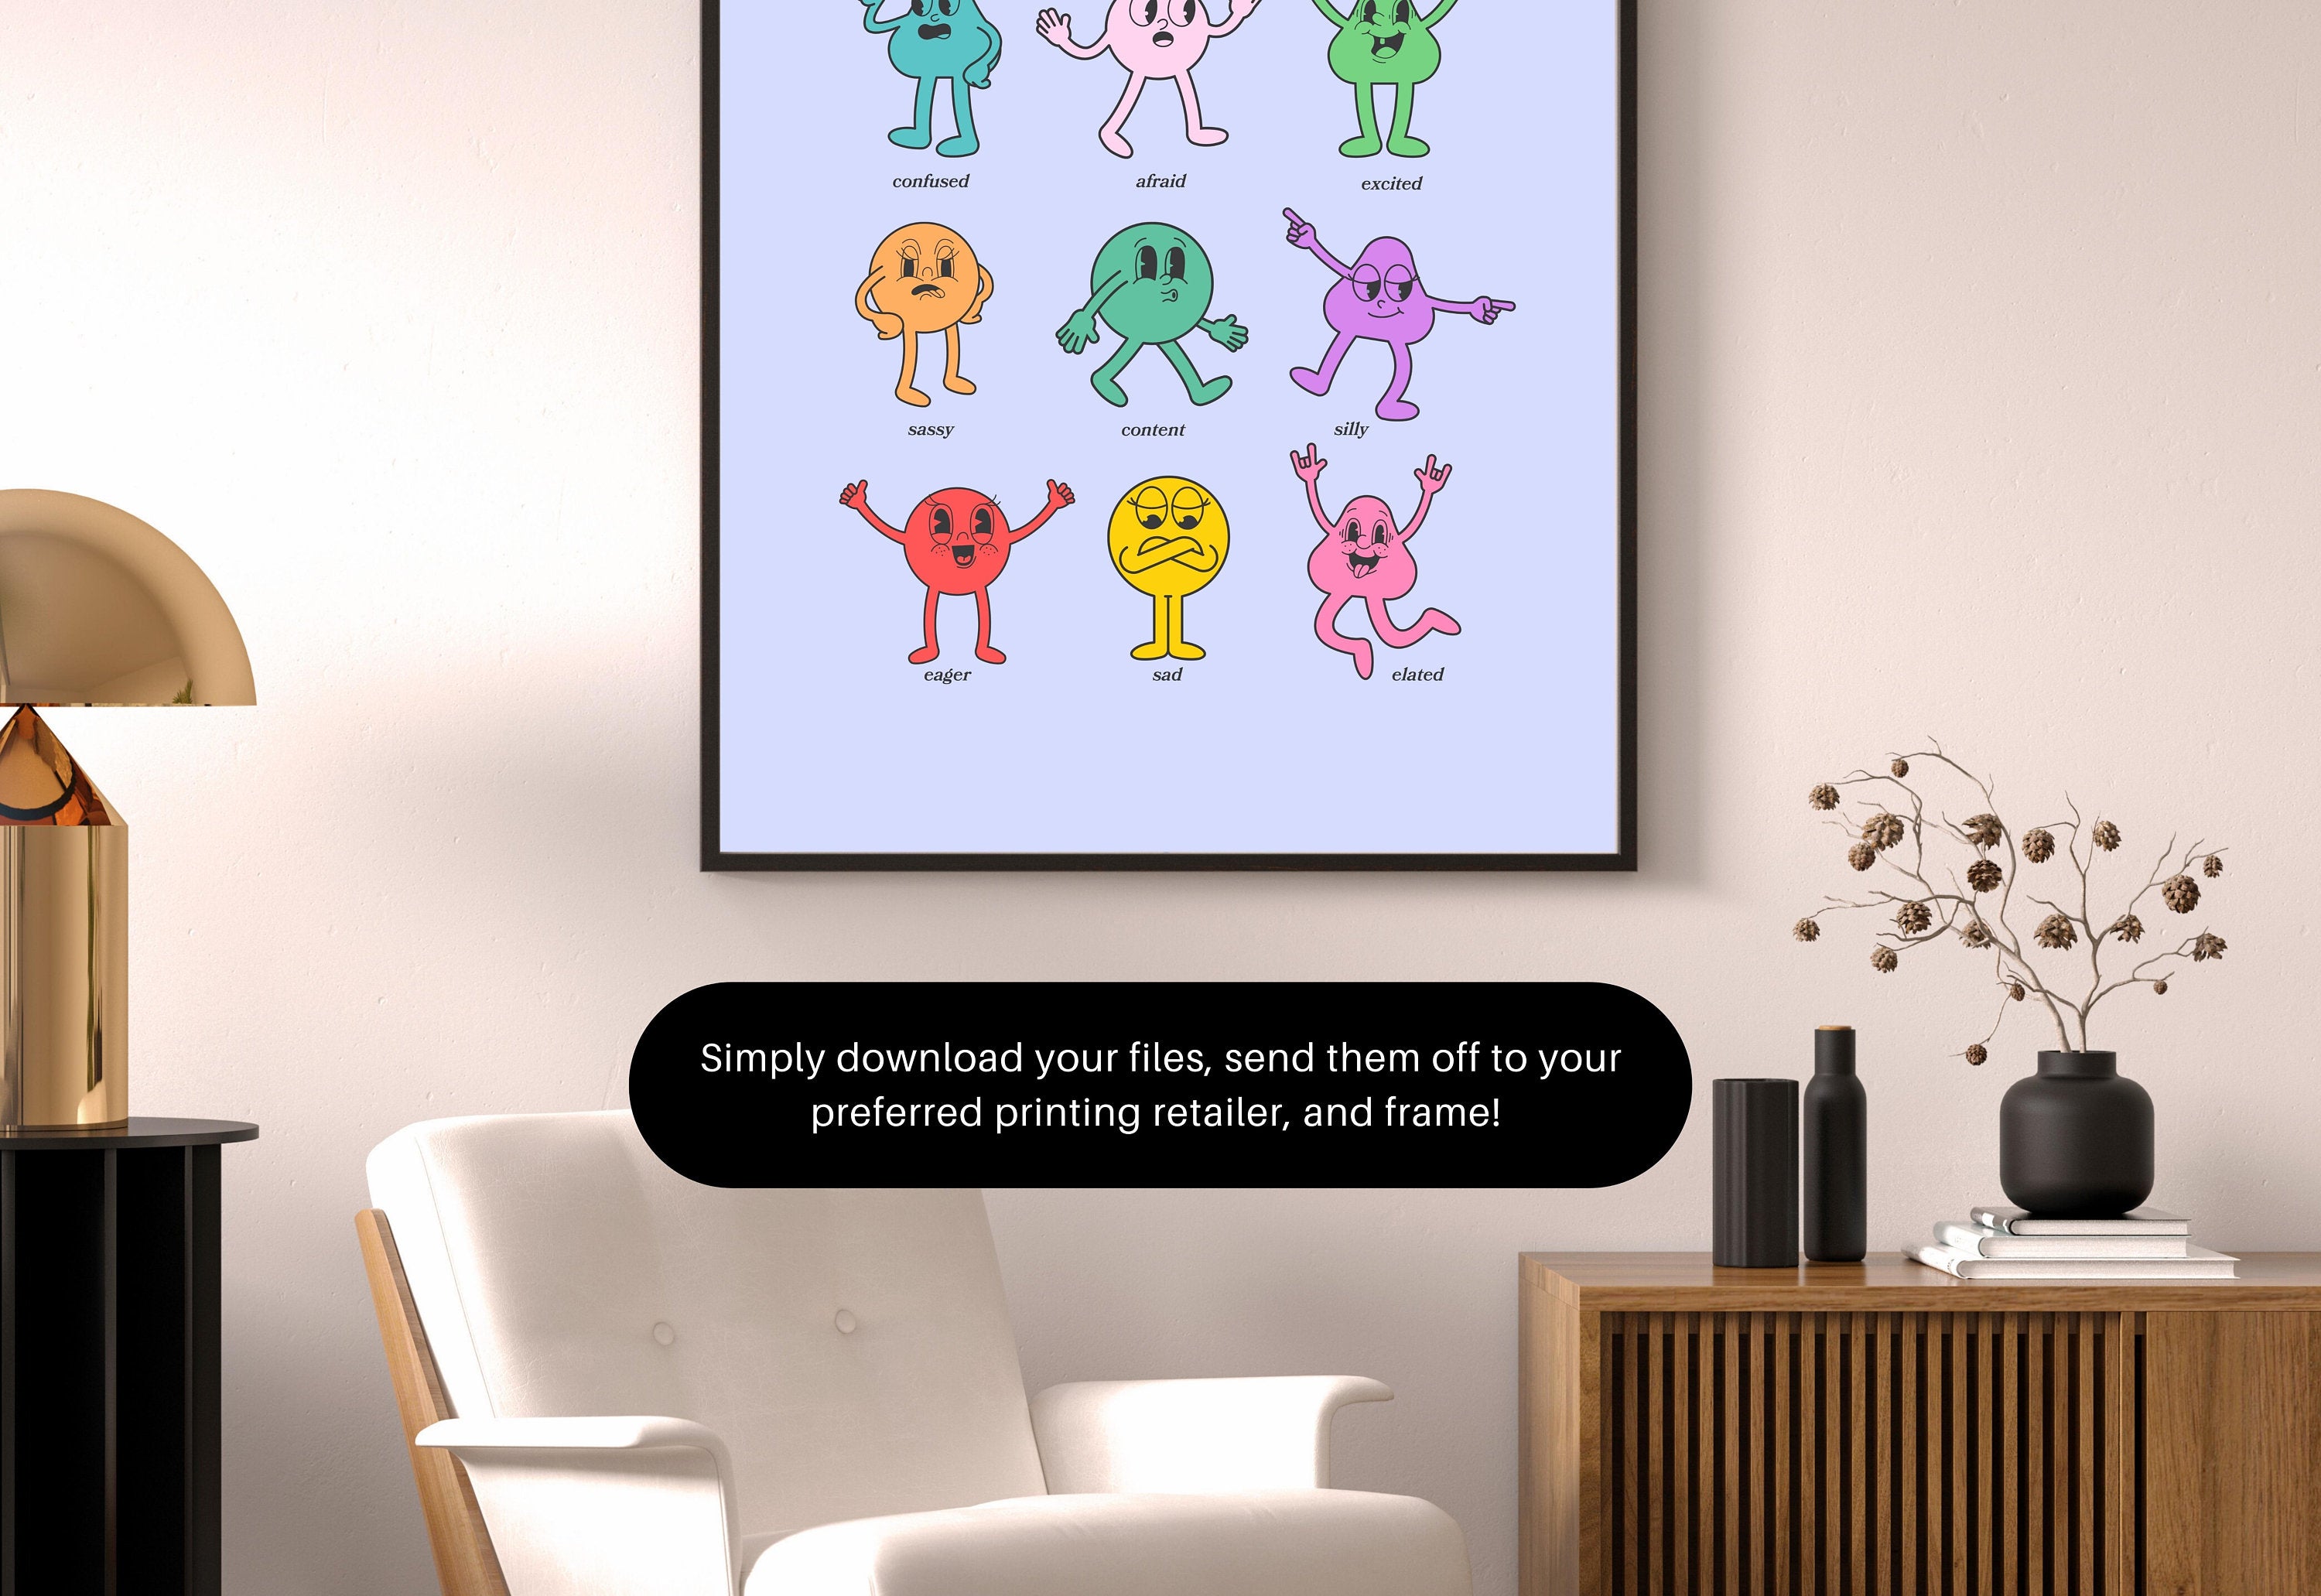 How Do You Feel Today? Retro Quote, Digital Prints Wall Art, Digital Prints, Emotions Art Prints, Mood and Feelings Poster, School Posters